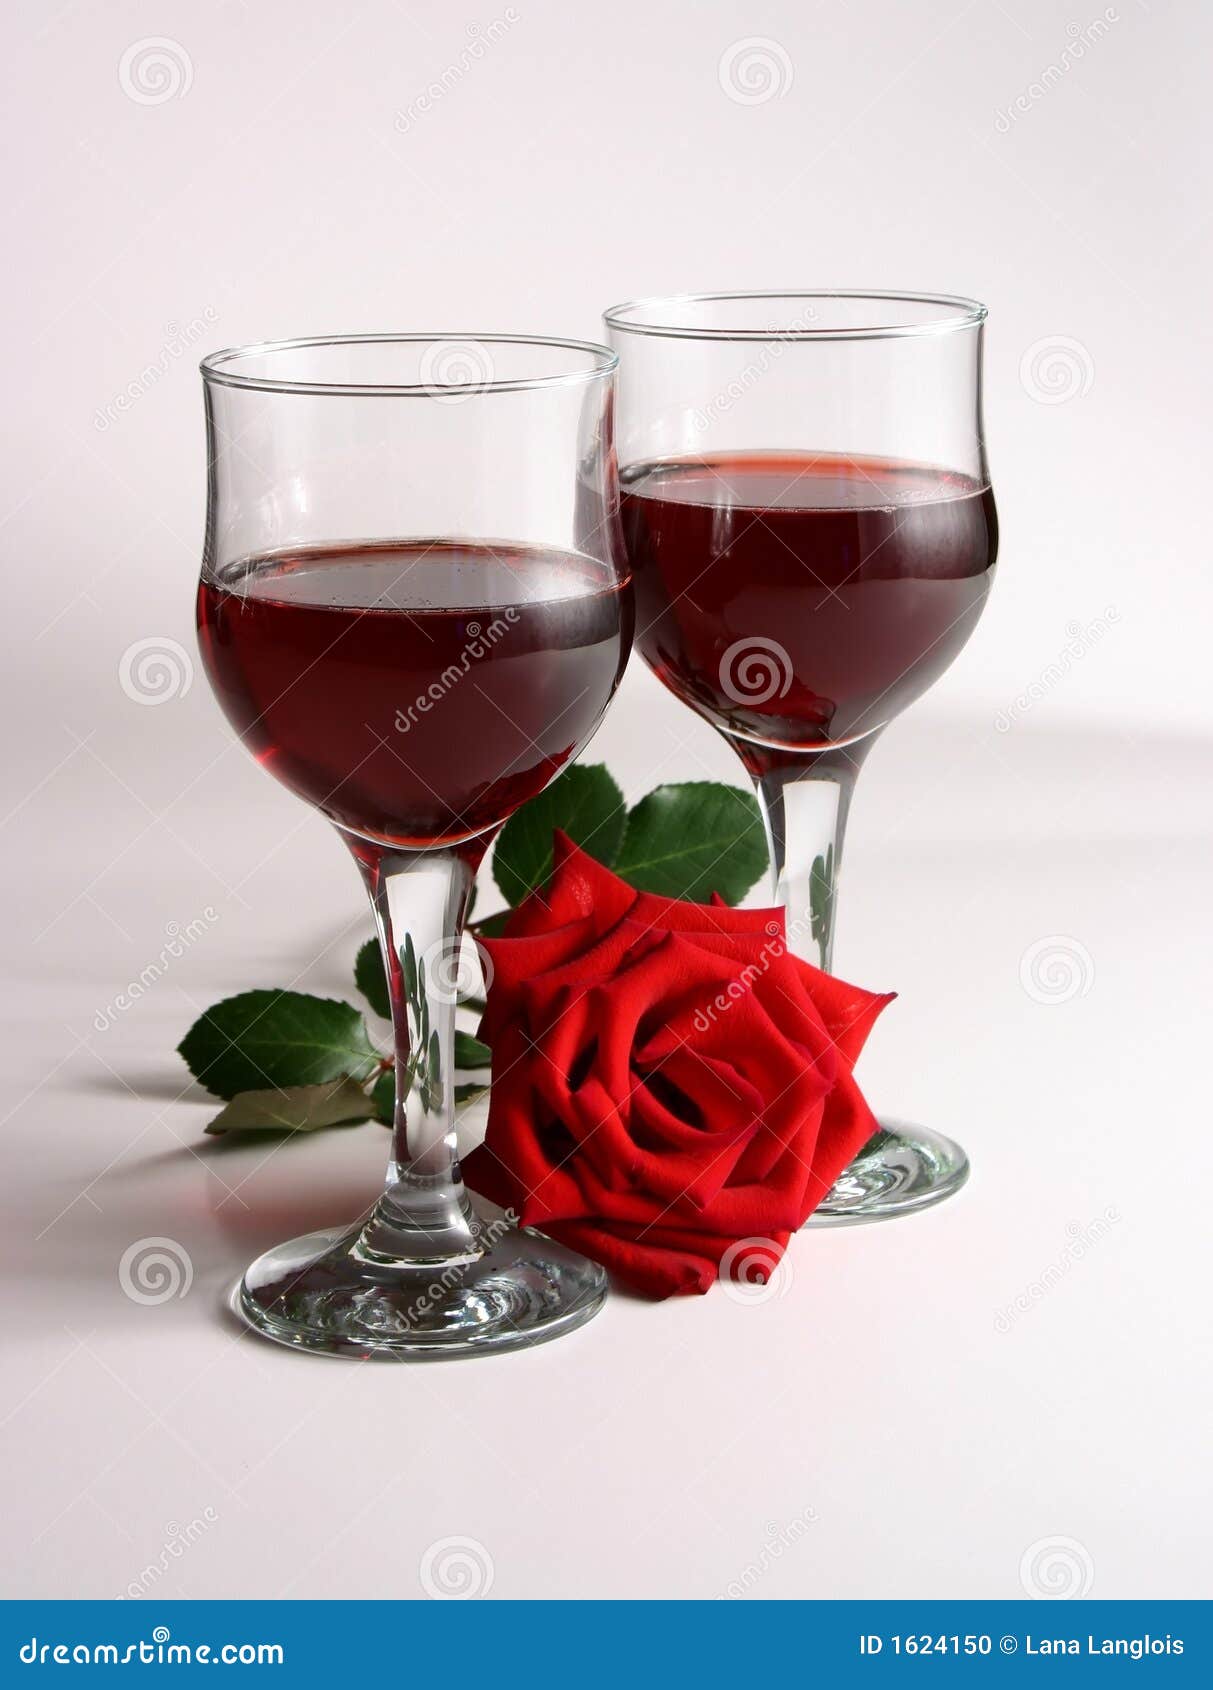 Red Wine And Rose Stock Photo - Image: 1624150